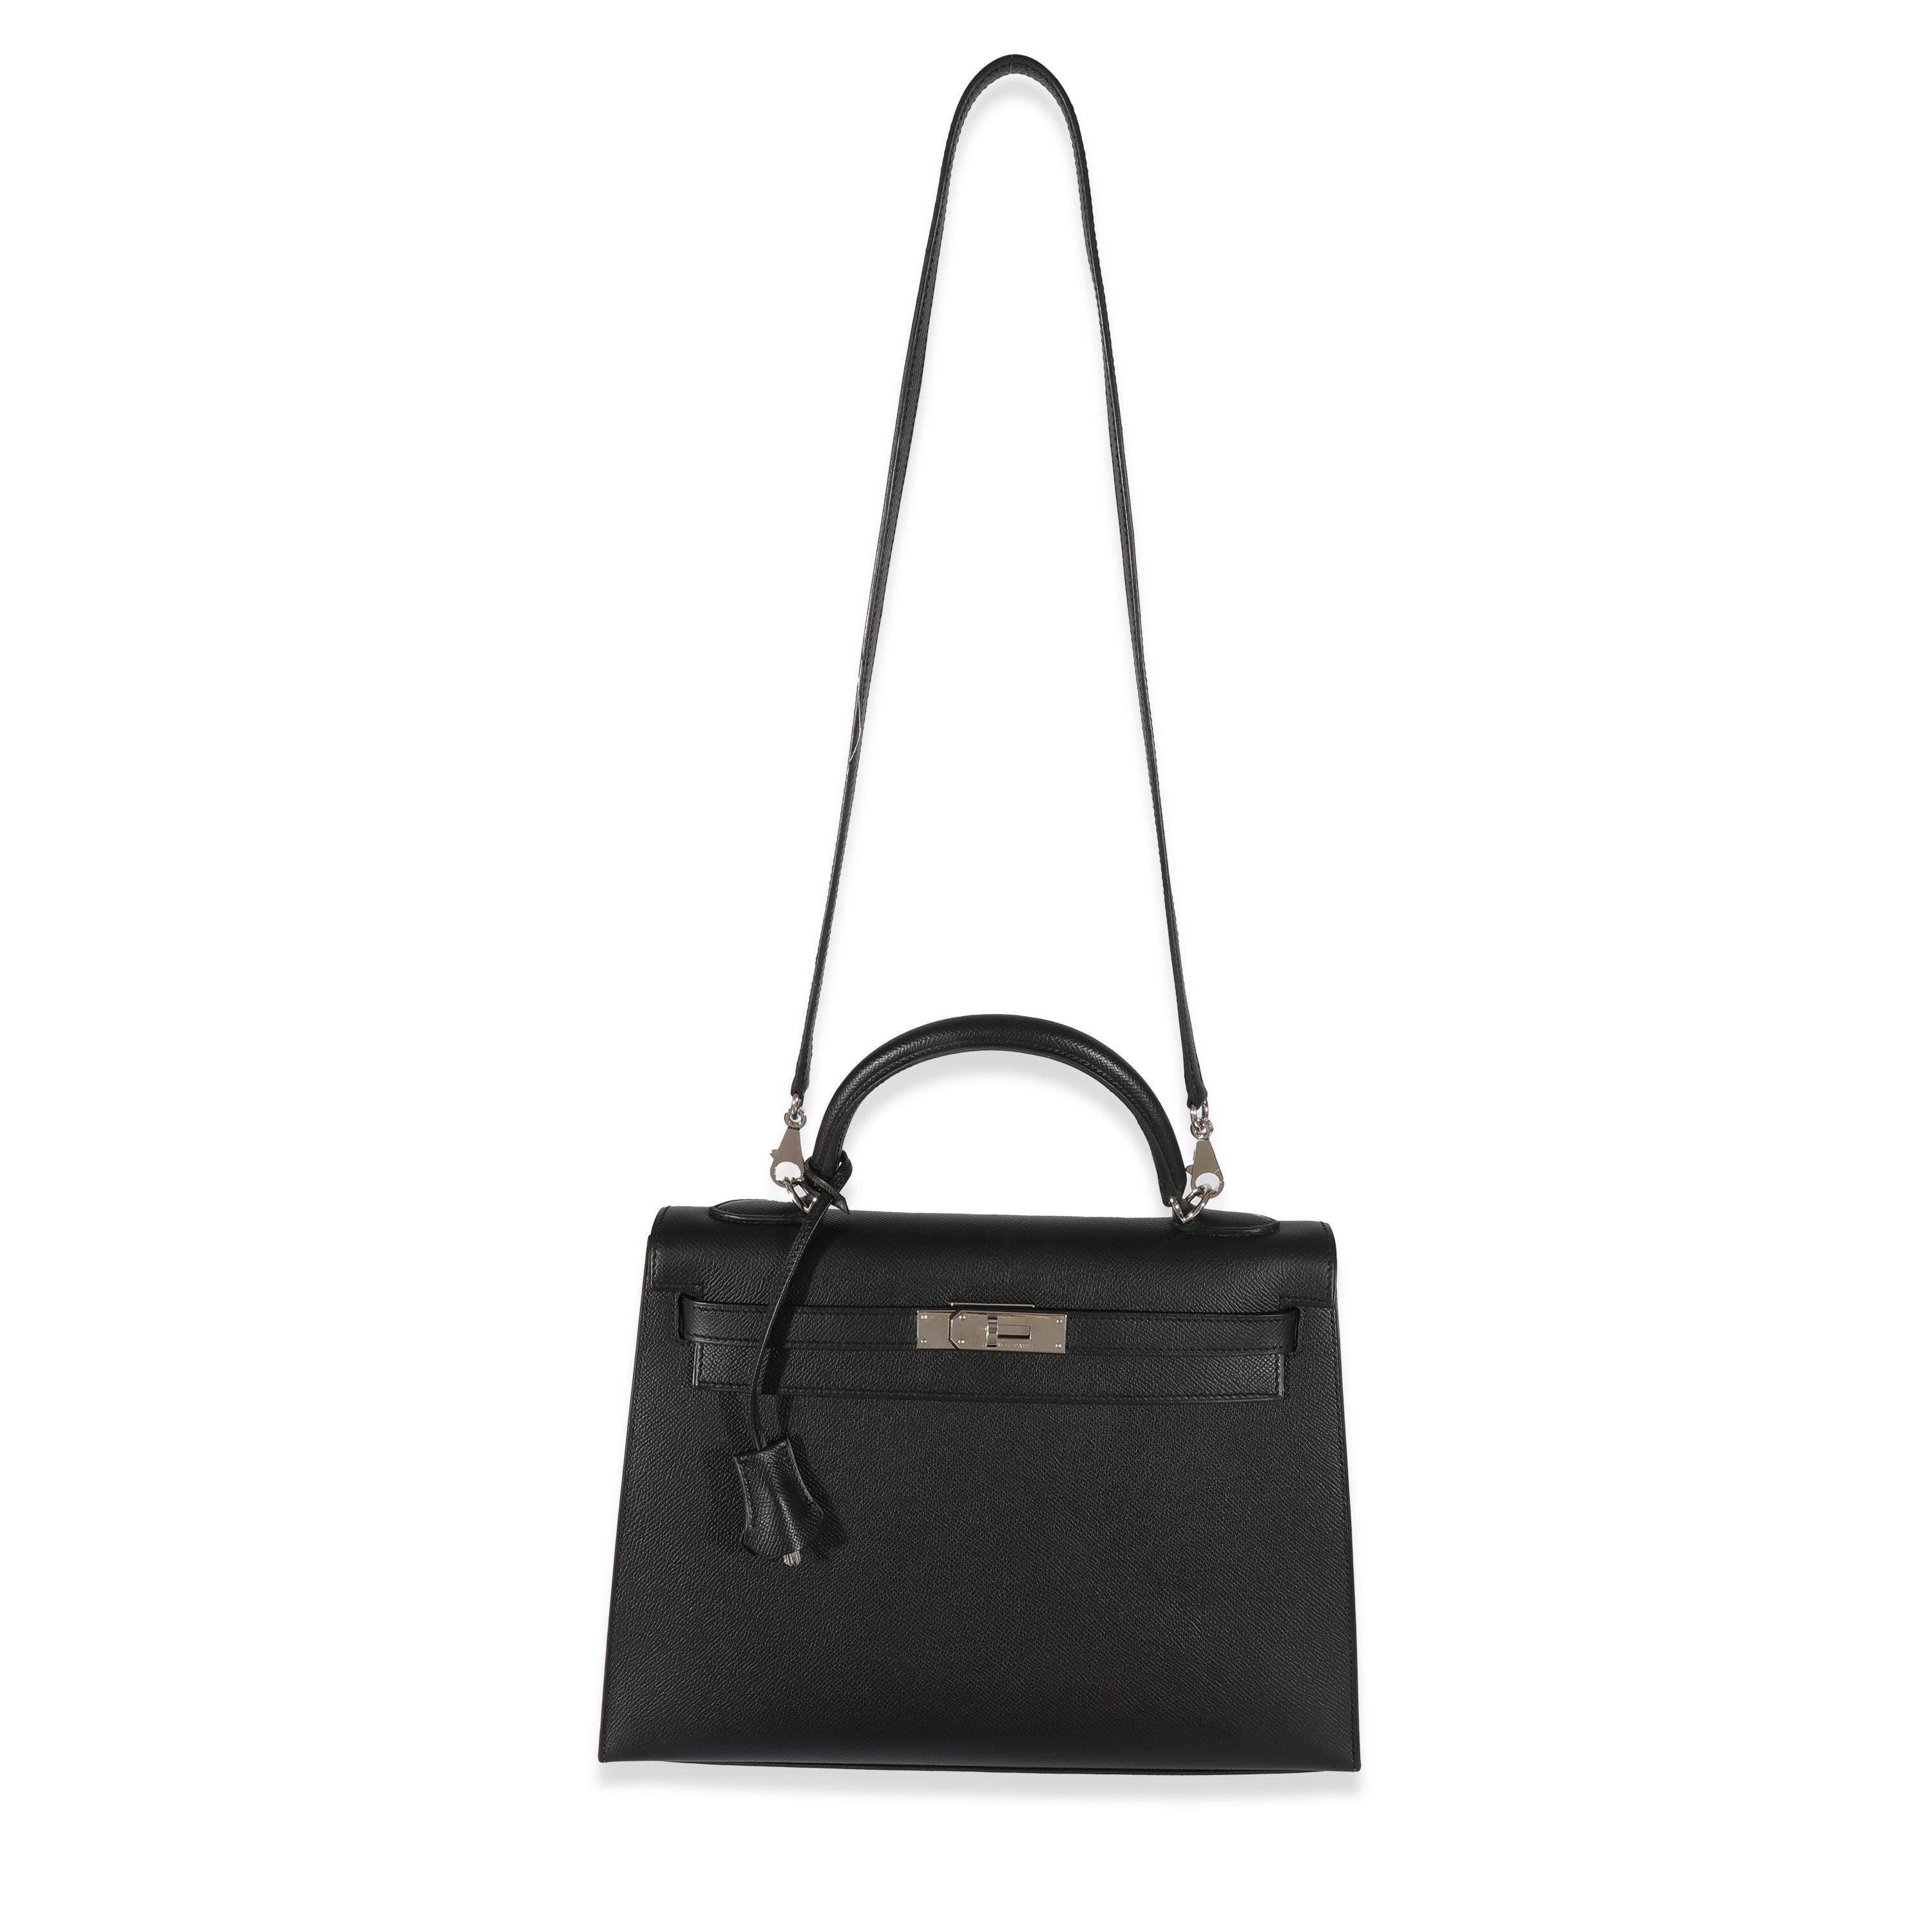 Listing Title: Hermès Kelly
SKU: 129797
Condition: Pre-owned 
Condition Description: Officially renamed in 1977, the Kelly tote bag from Hermès was originally called the Sac à Dépêches (which translates as ‘the dispatch bag’). The structured bag’s